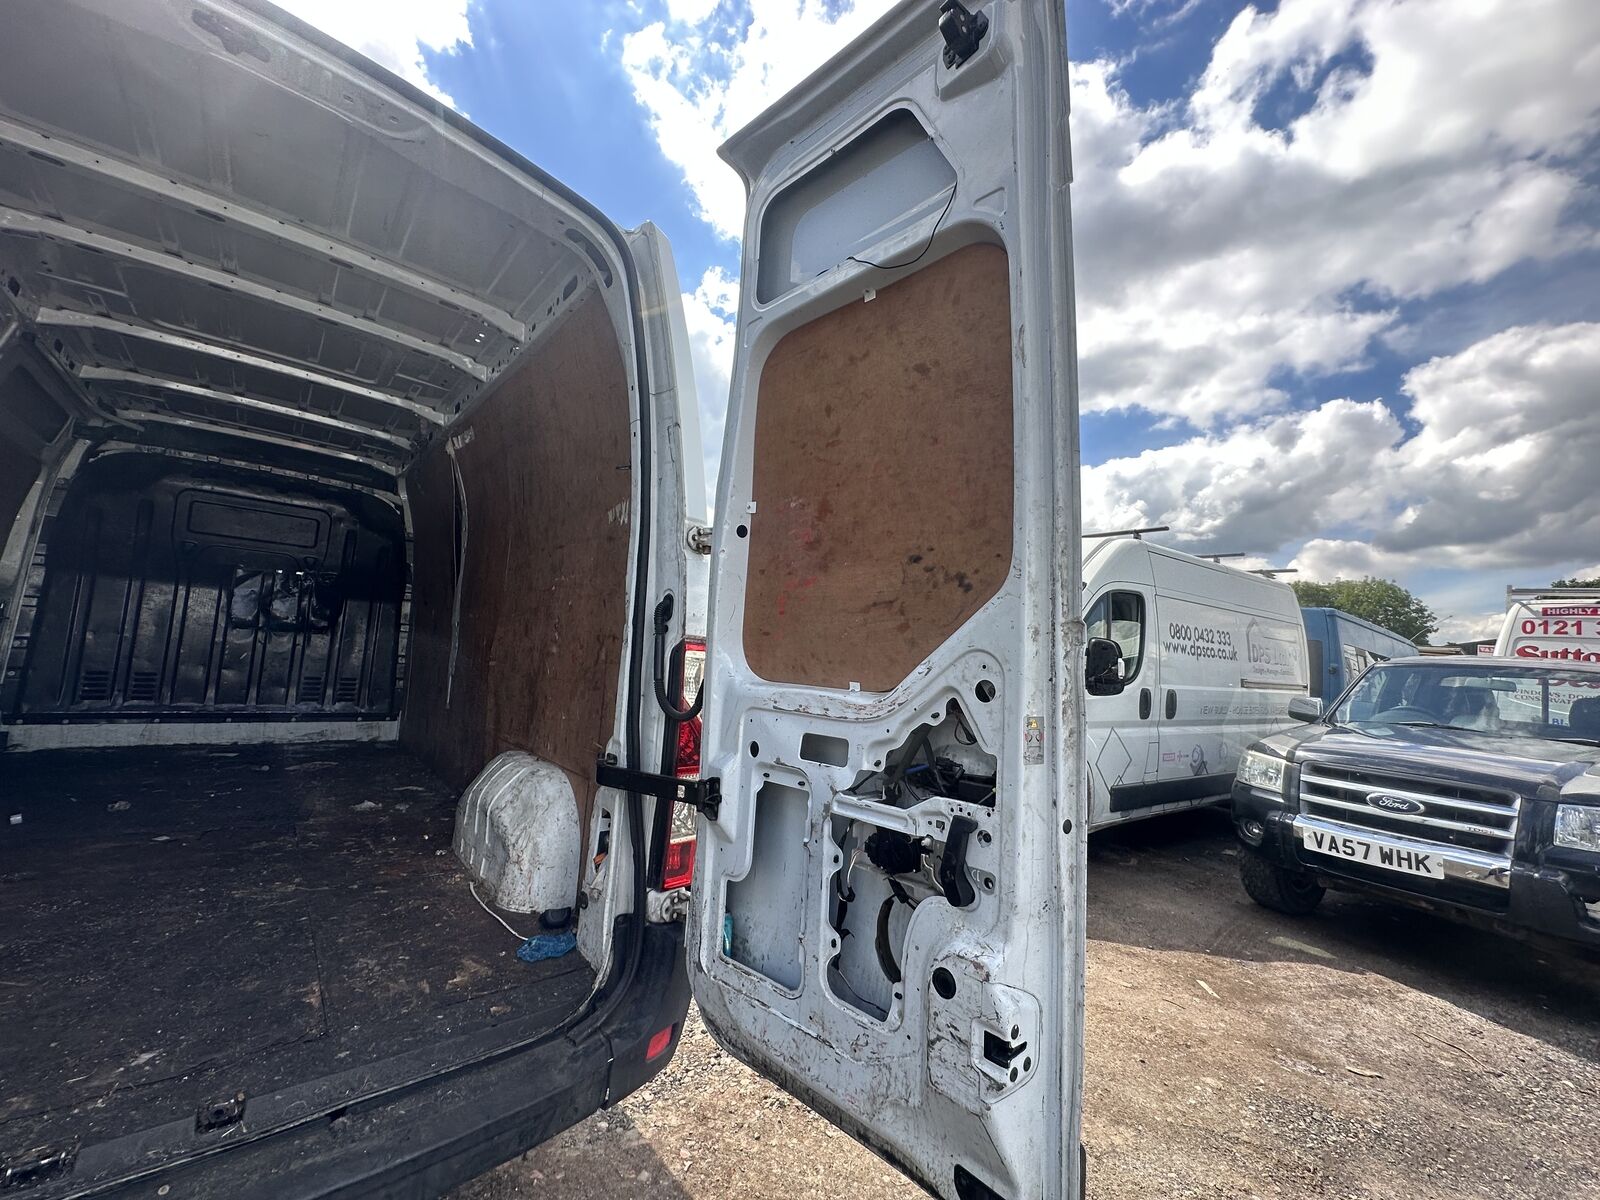 Bid on PRICED TO CLEAR - 2016 RENAULT MASTER LWB - ELEVATE YOUR BUSINESS WITH PERFORMANCE- Buy &amp; Sell on Auction with EAMA Group